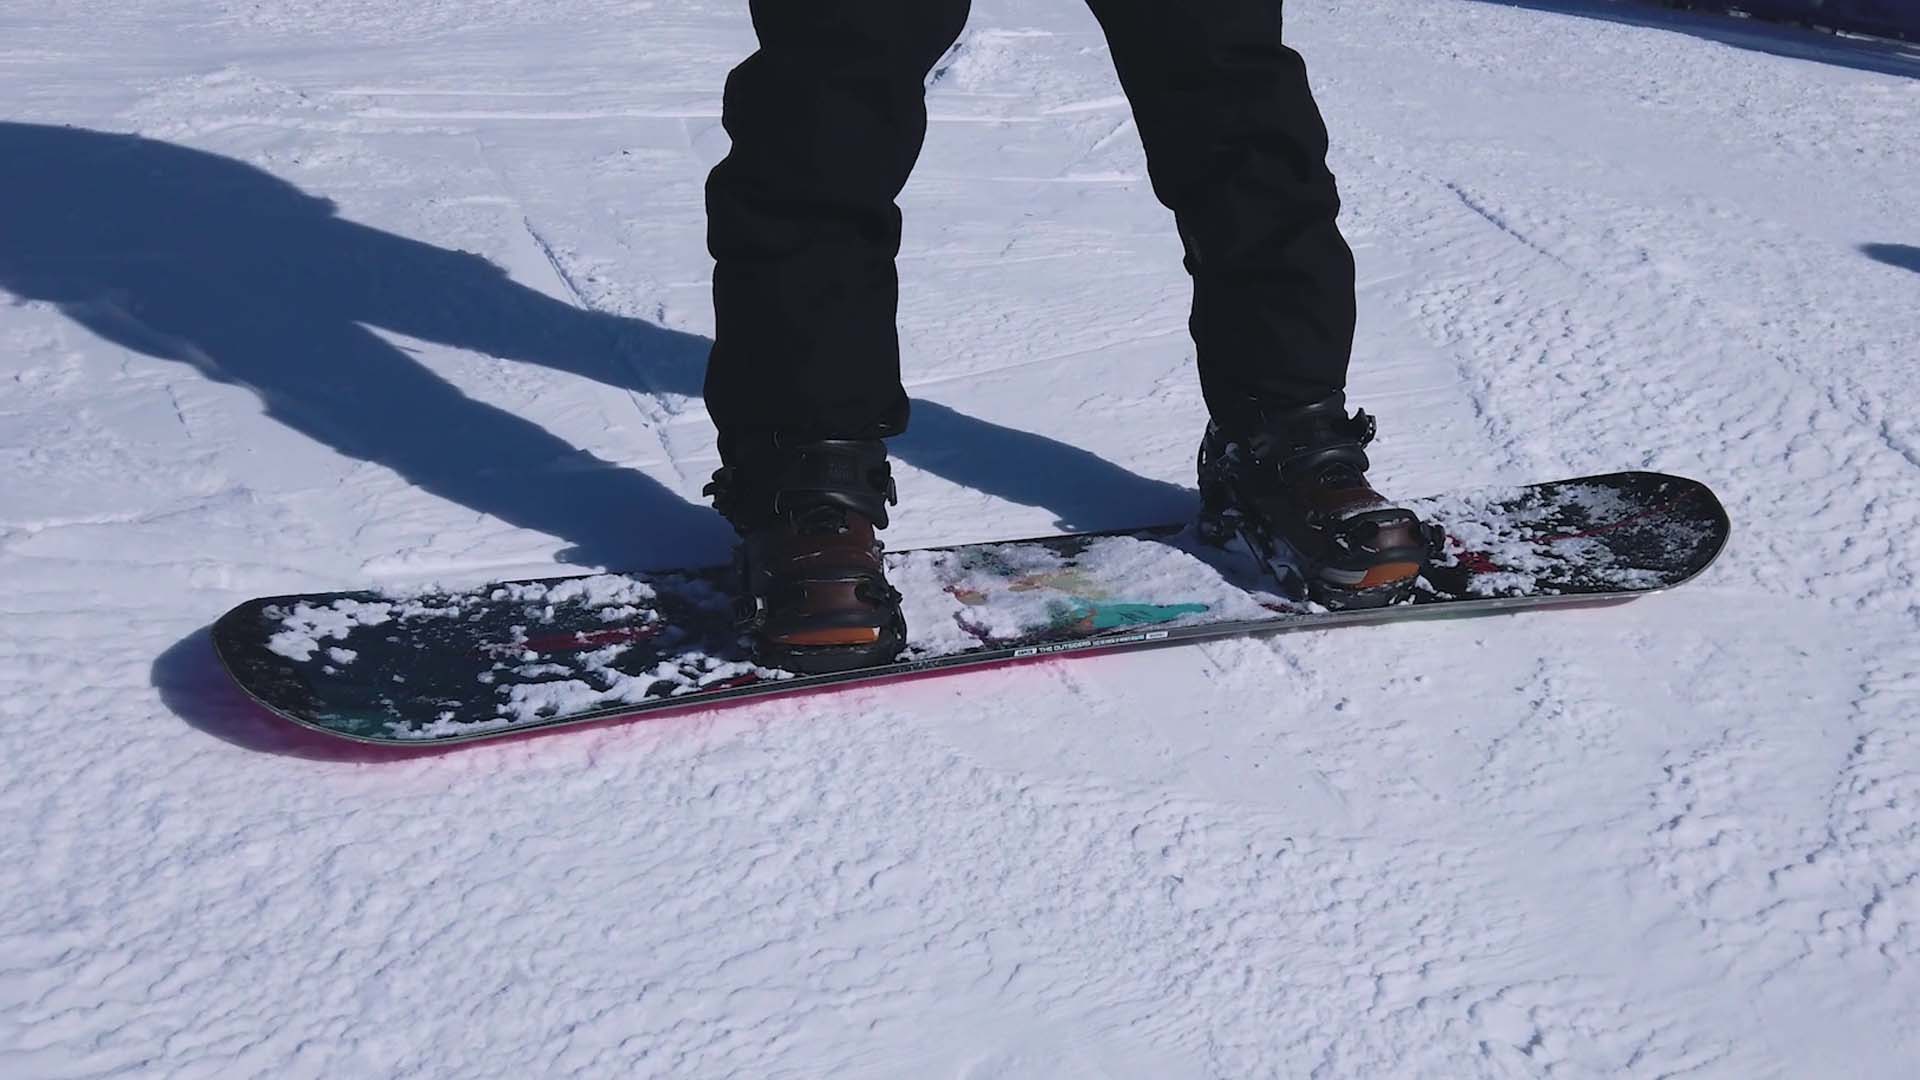 Capita The Outsiders 2020 Review - Snowboard Robot